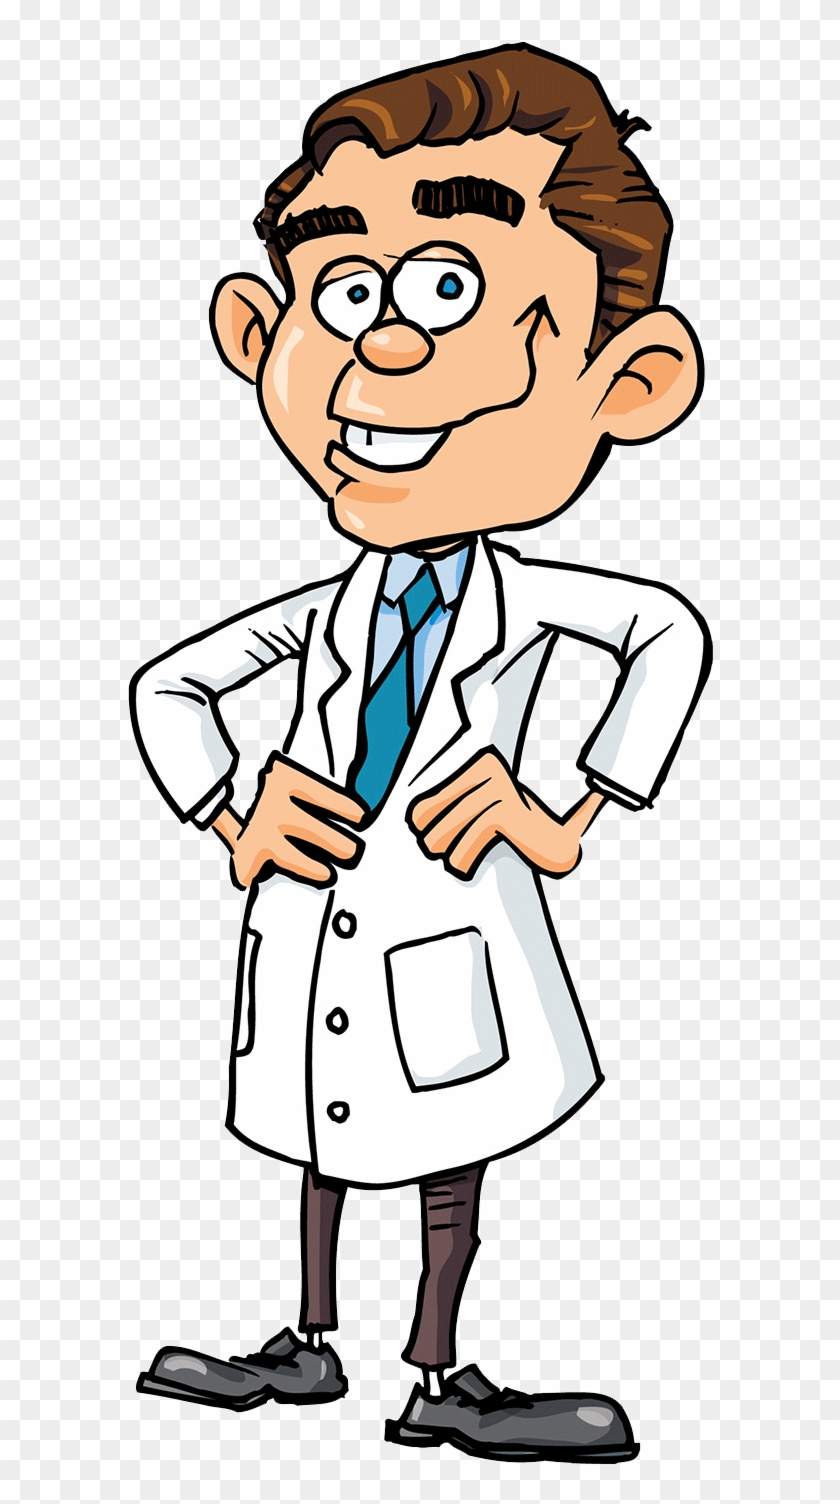 Potato Isn't A Real Doctor But A Team Of Potato Experts Clipart #2148380